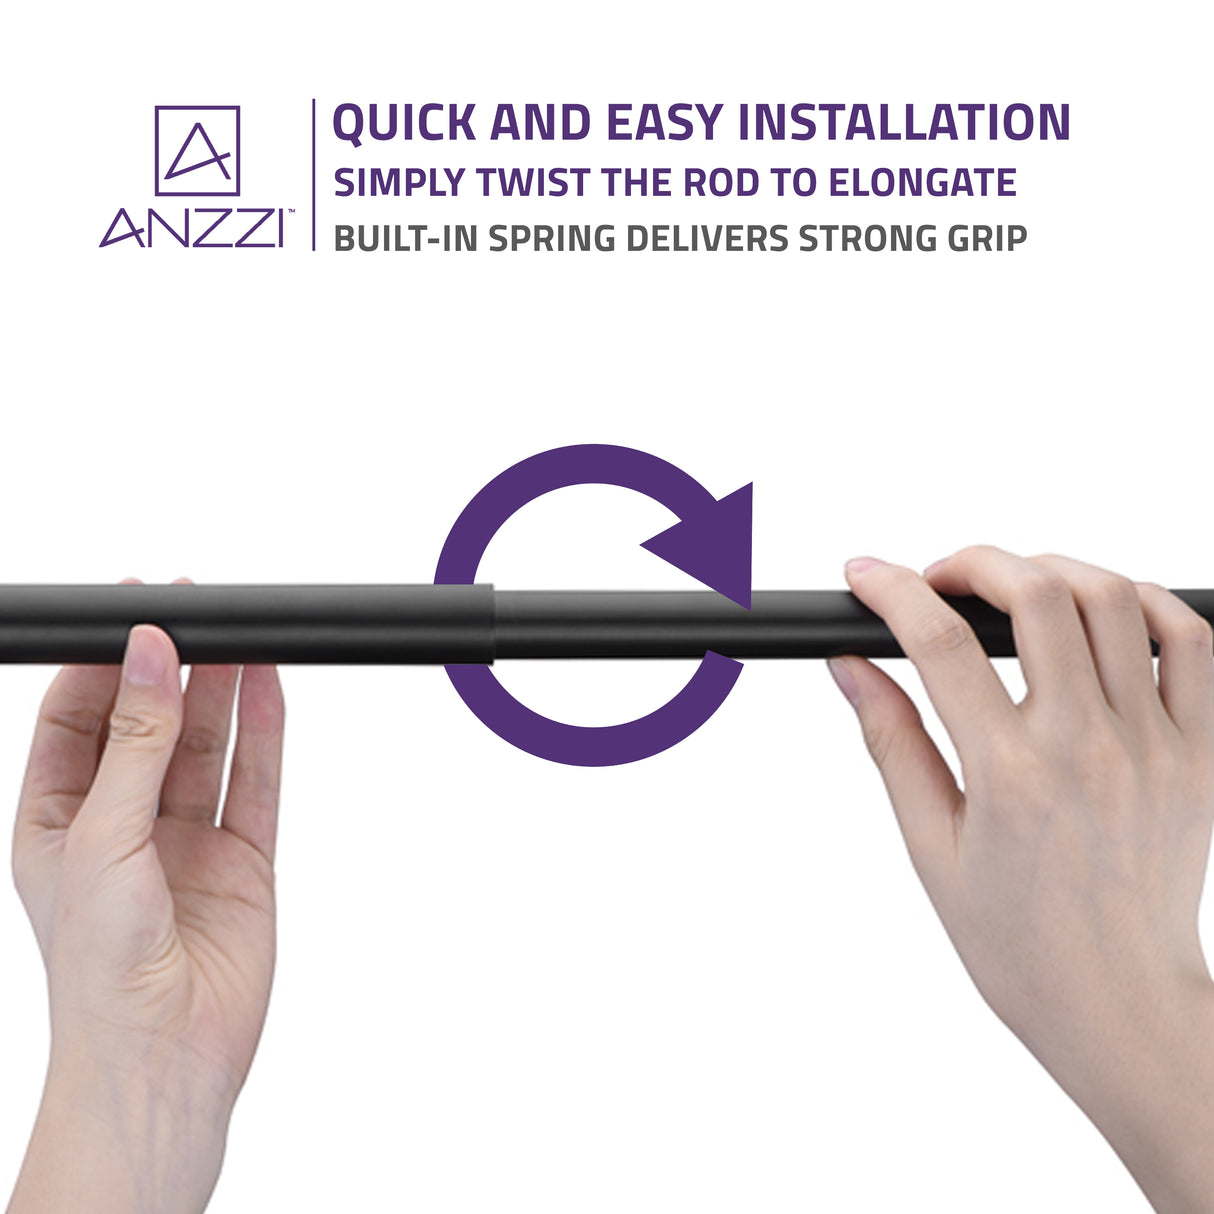 ANZZI AC-AZSR55MB 35-55 Inches Shower Curtain Rod with Shower Hooks in Matt Black | Adjustable Tension Shower Doorway Curtain Rod | Rust Resistant No Drilling Anti-Slip Bar for Bathroom | AC-AZSR55MB